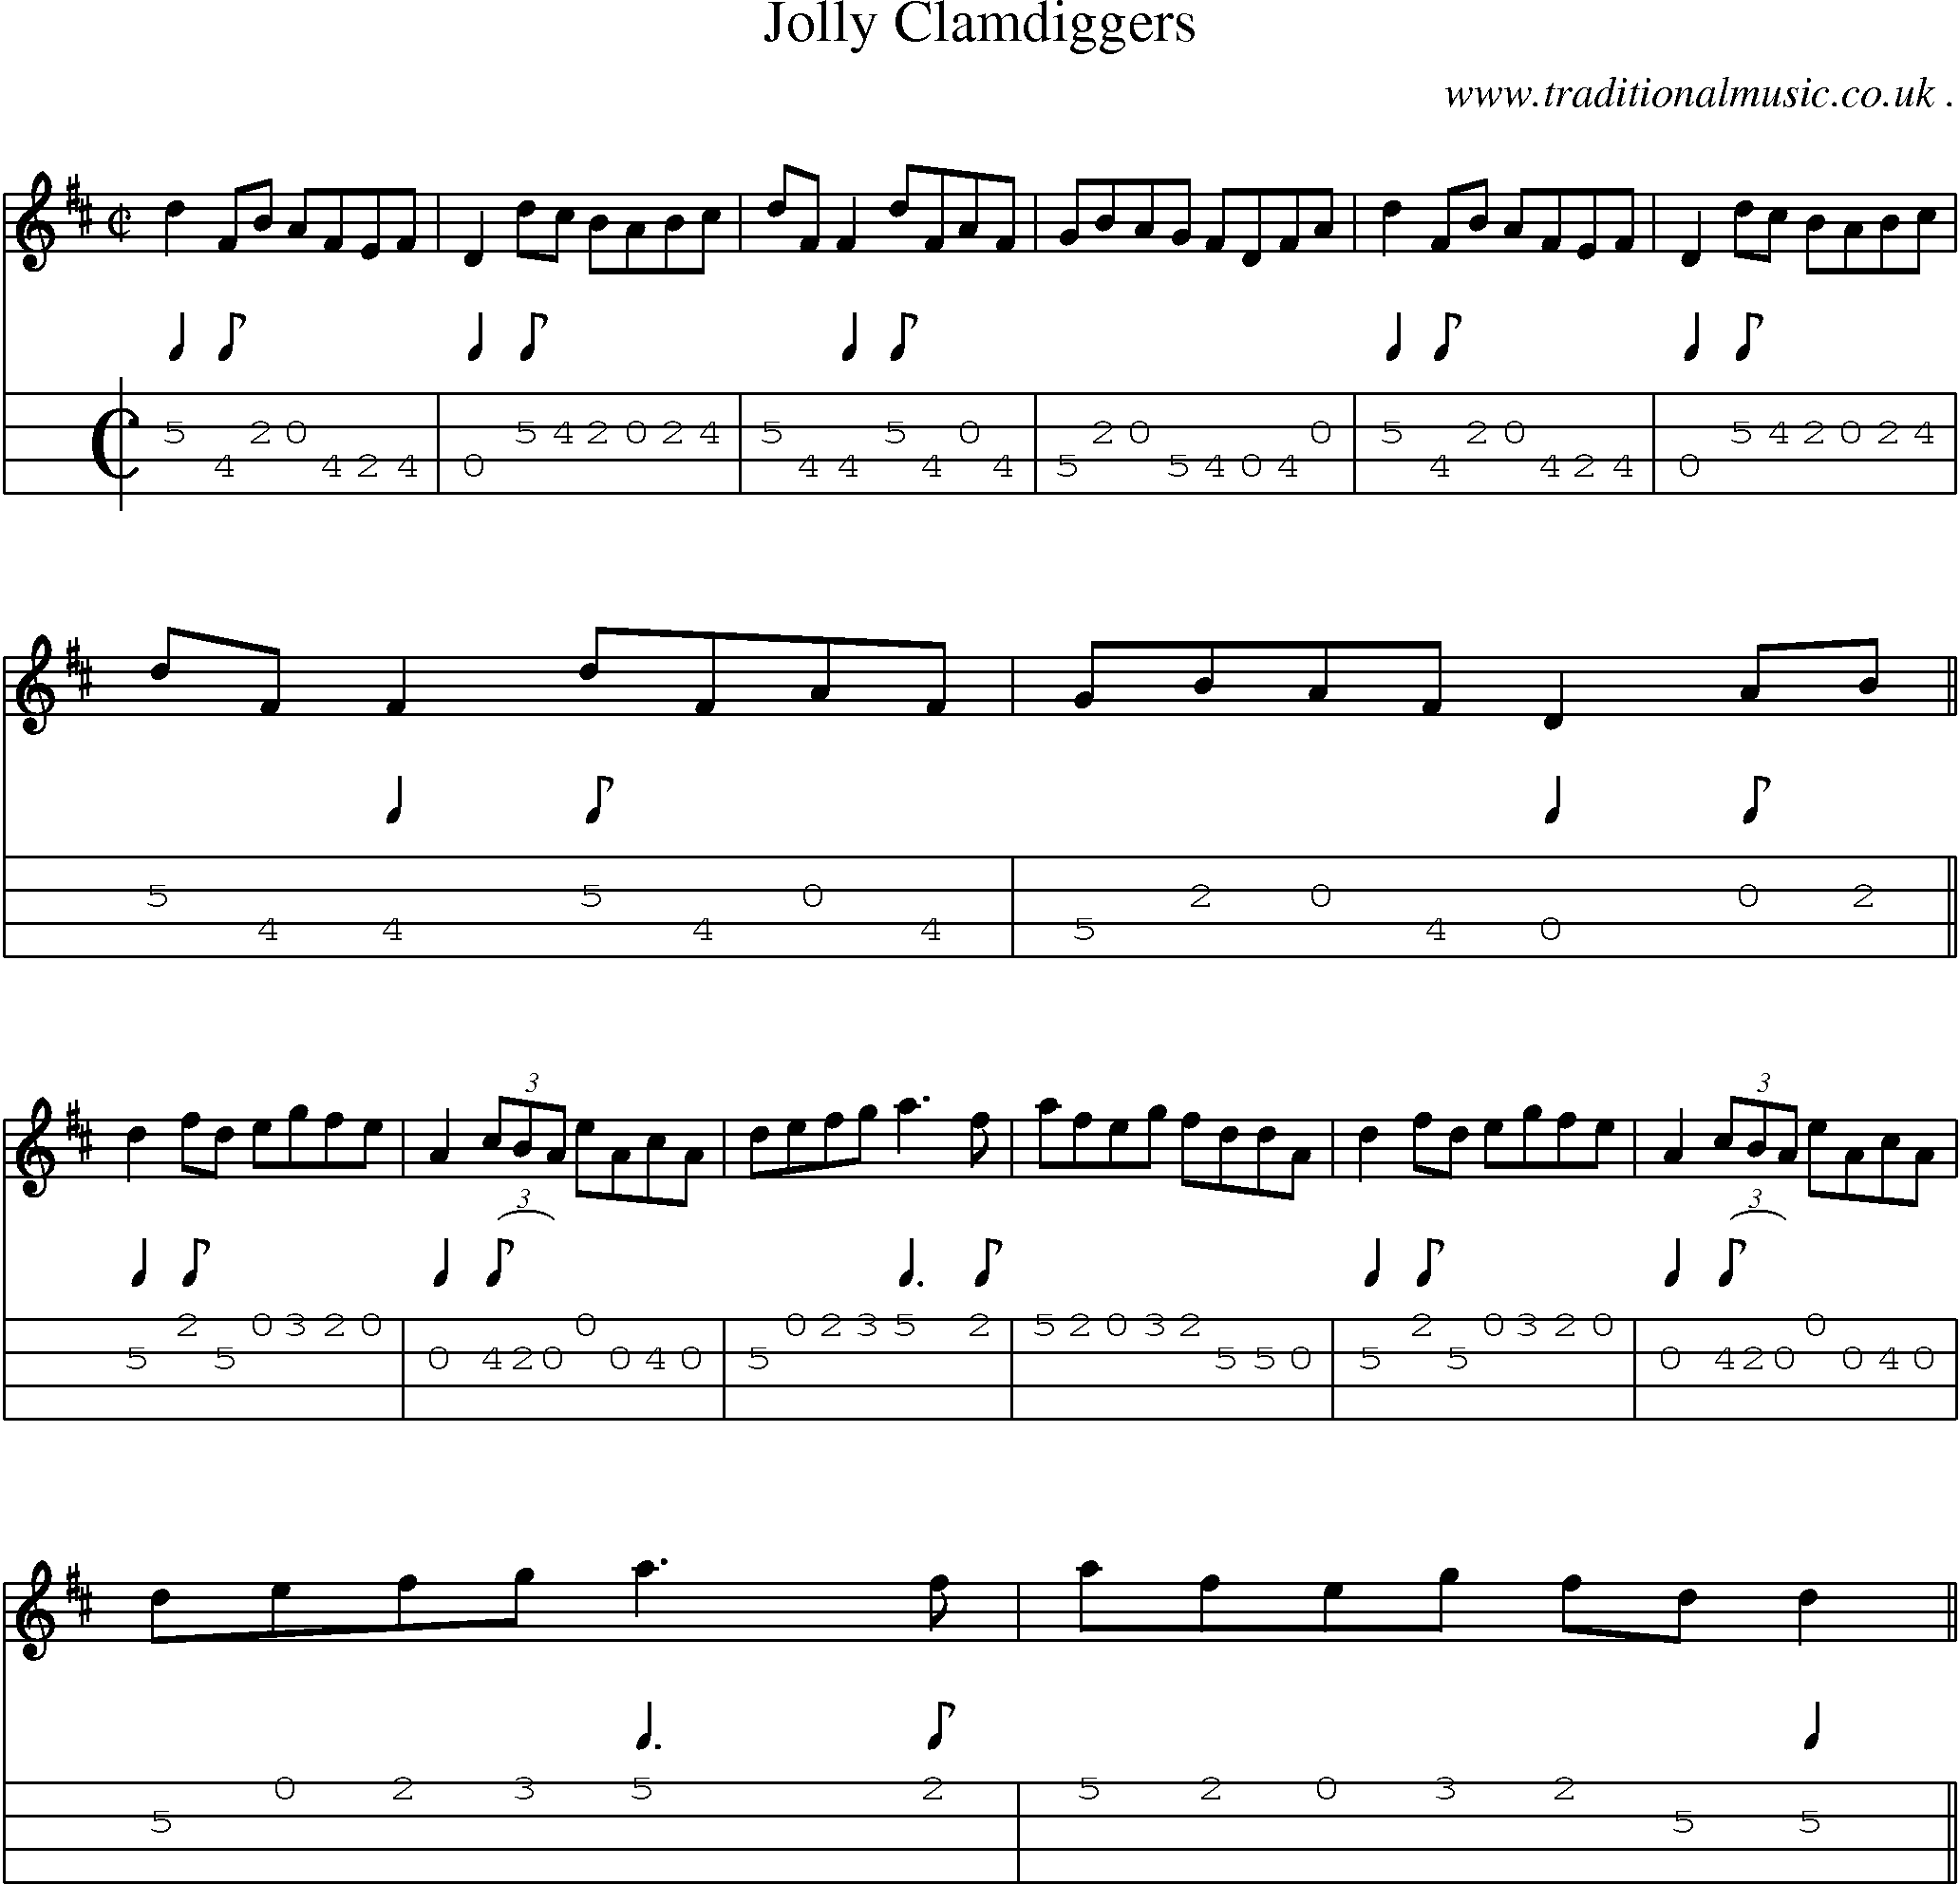 Sheet-Music and Mandolin Tabs for Jolly Clamdiggers